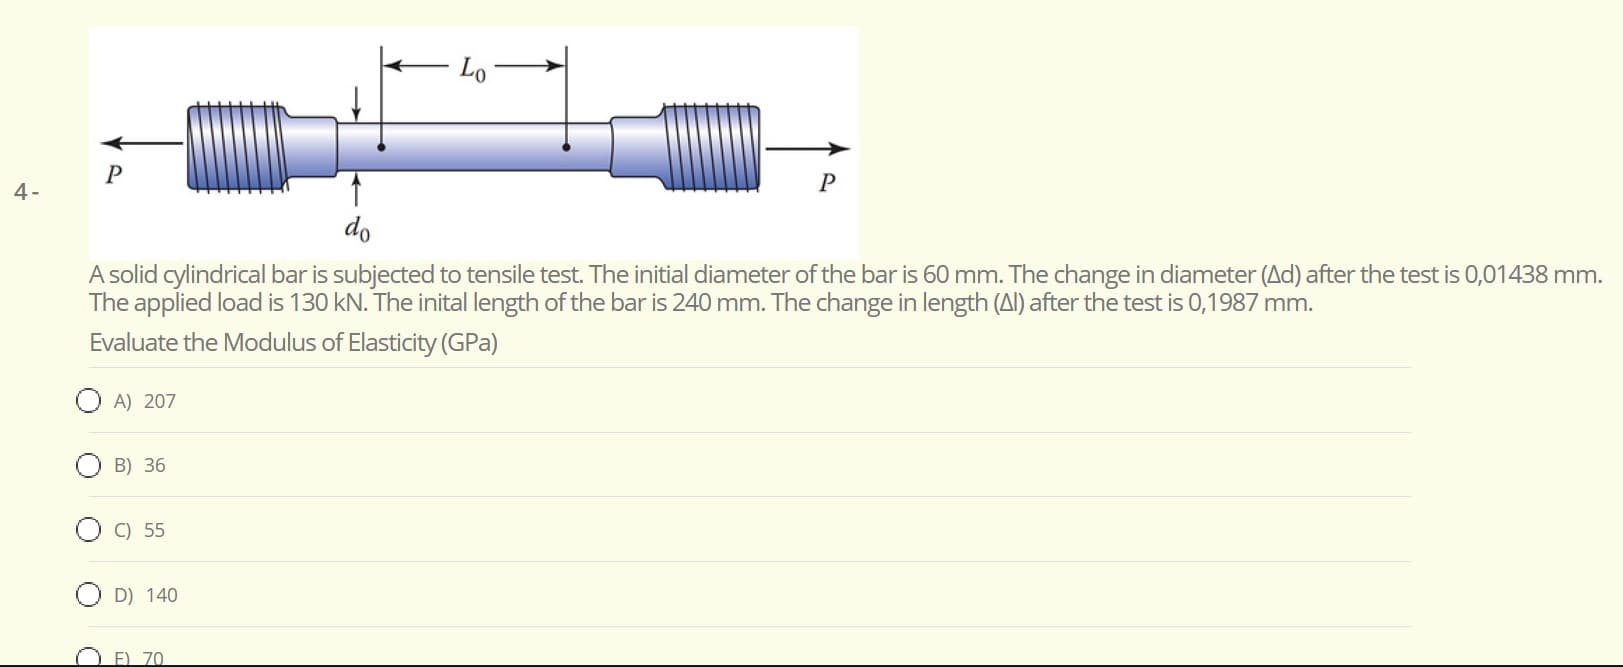 Lo
do
A solid cylindrical bar is subjected to tensile test. The initial diameter of the bar is 60 mm. The change in diameter (Ad) after the test is 0,01438 mm.
The applied load is 130 kN. The inital length of the bar is 240 mm. The change in length (Al) after the test is 0,1987 mm.
Evaluate the Modulus of Elasticity (GPa)
A) 207
B) 36
C) 55
D) 140
F) 70
